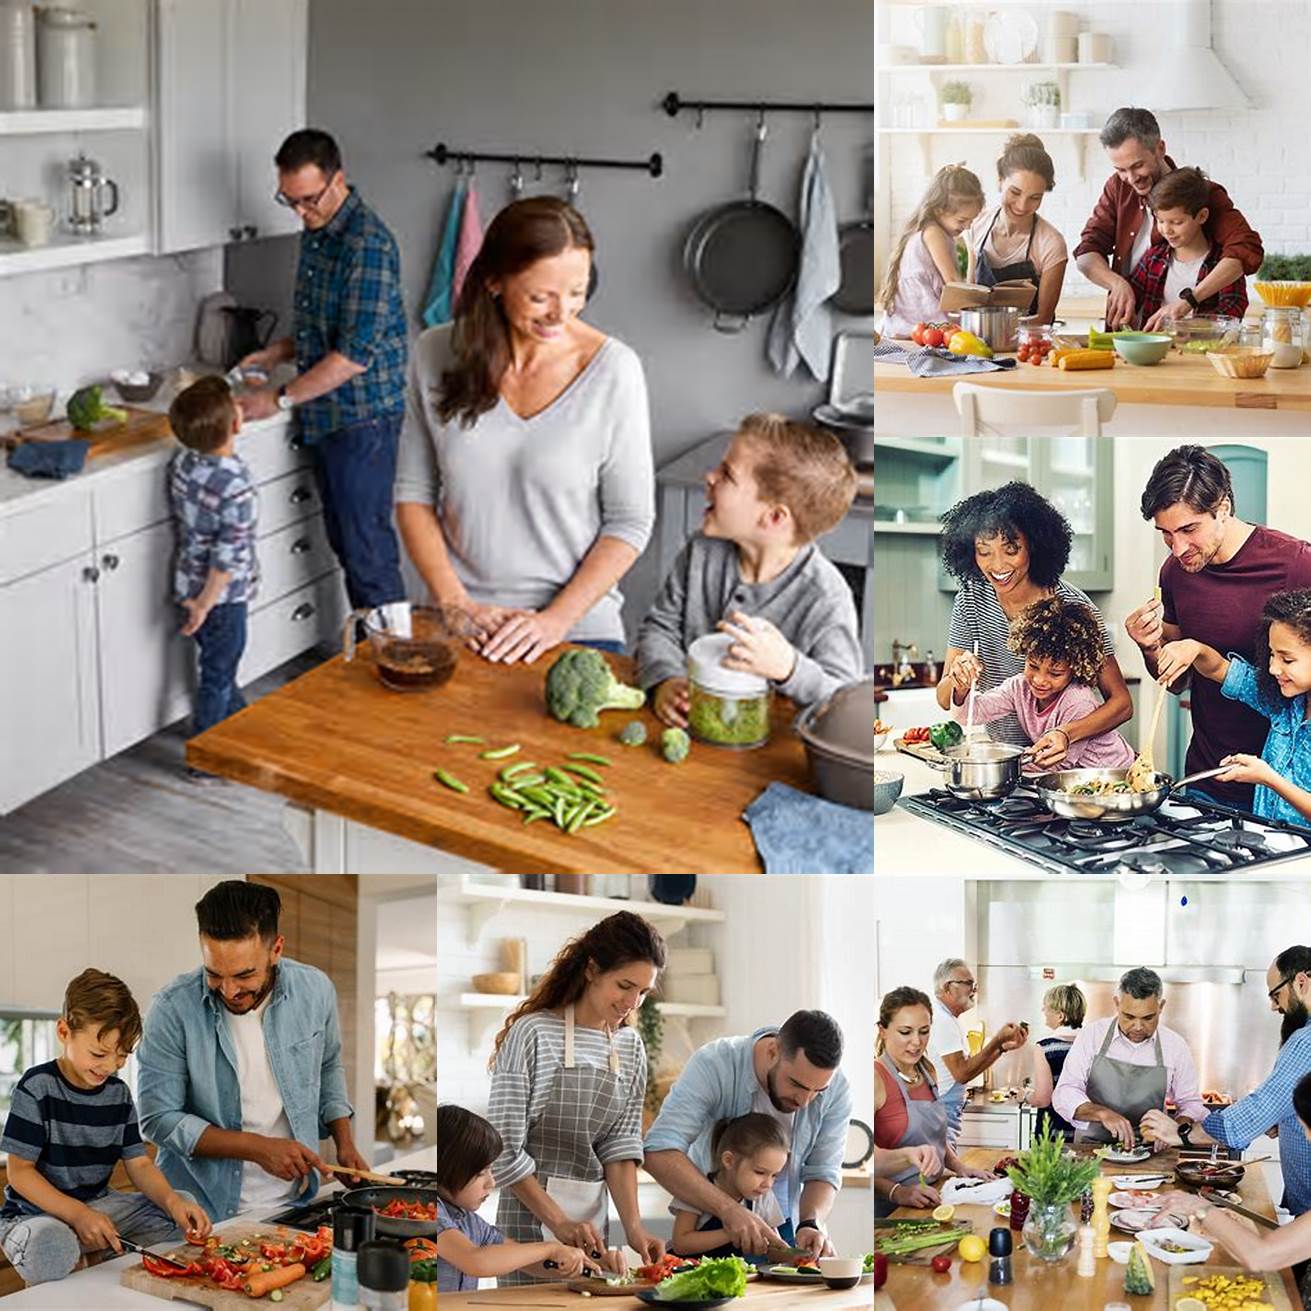 Cooking with family or friends